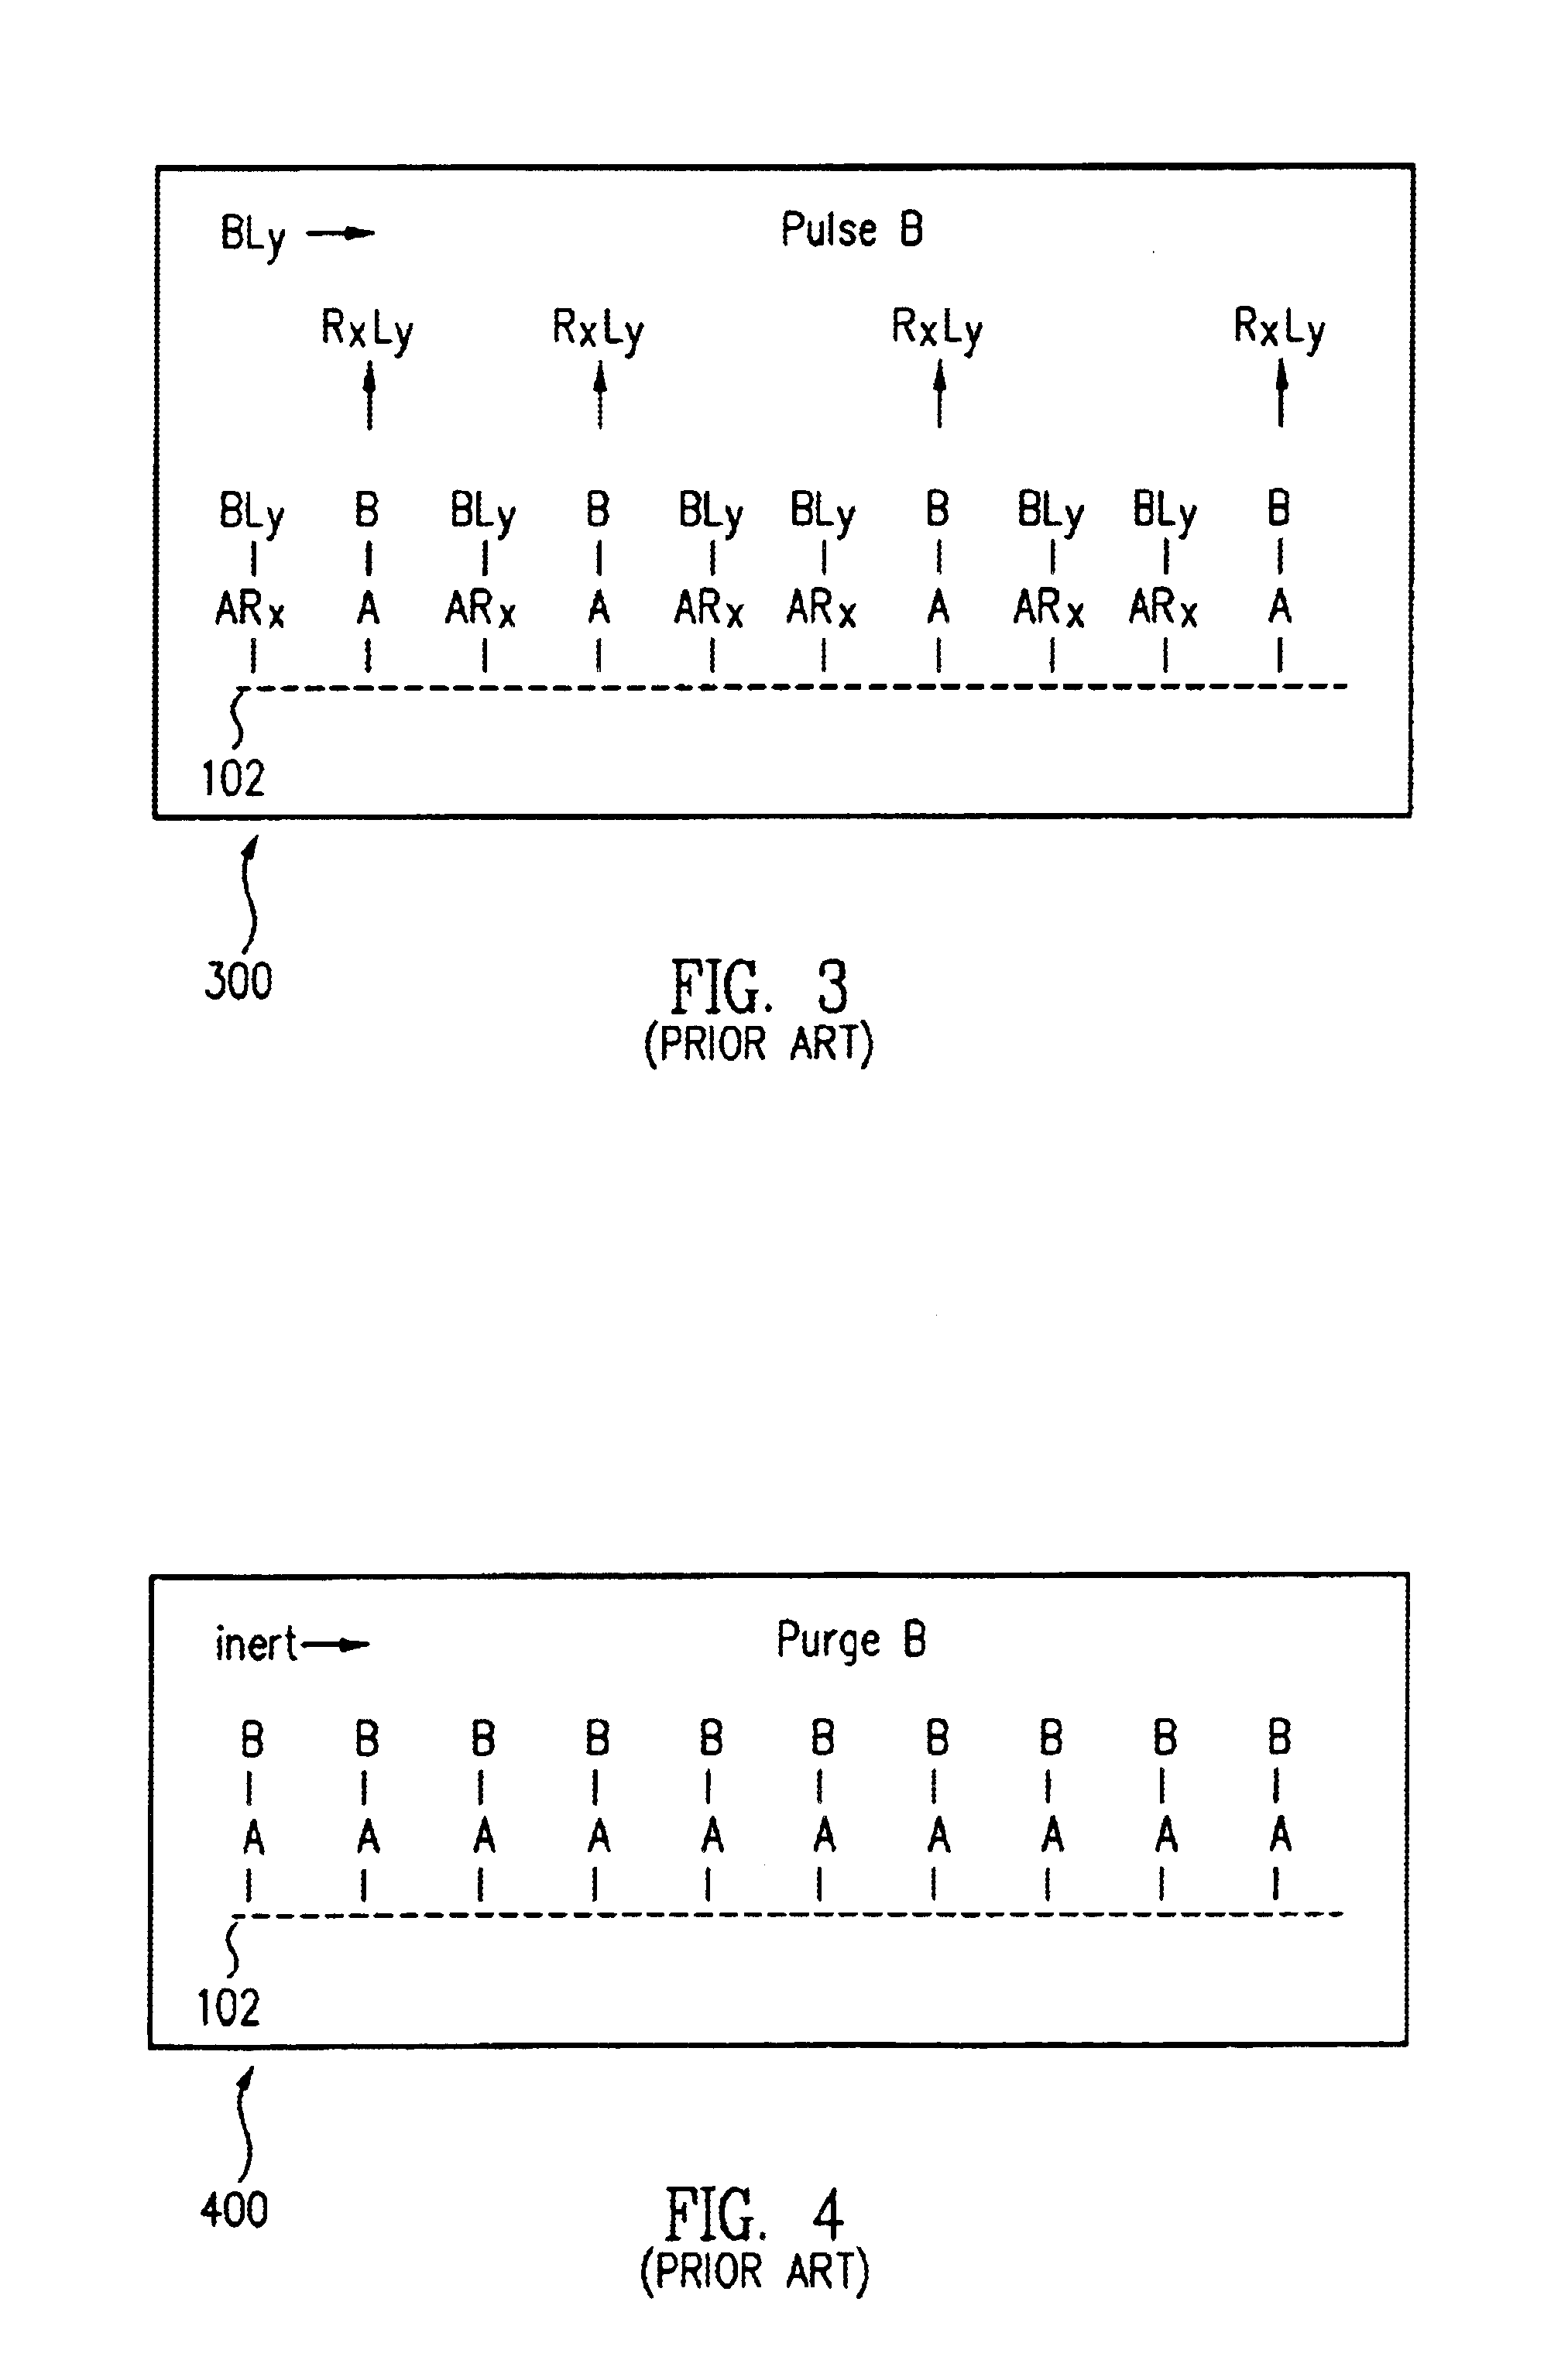 Atomic layer deposition systems and methods